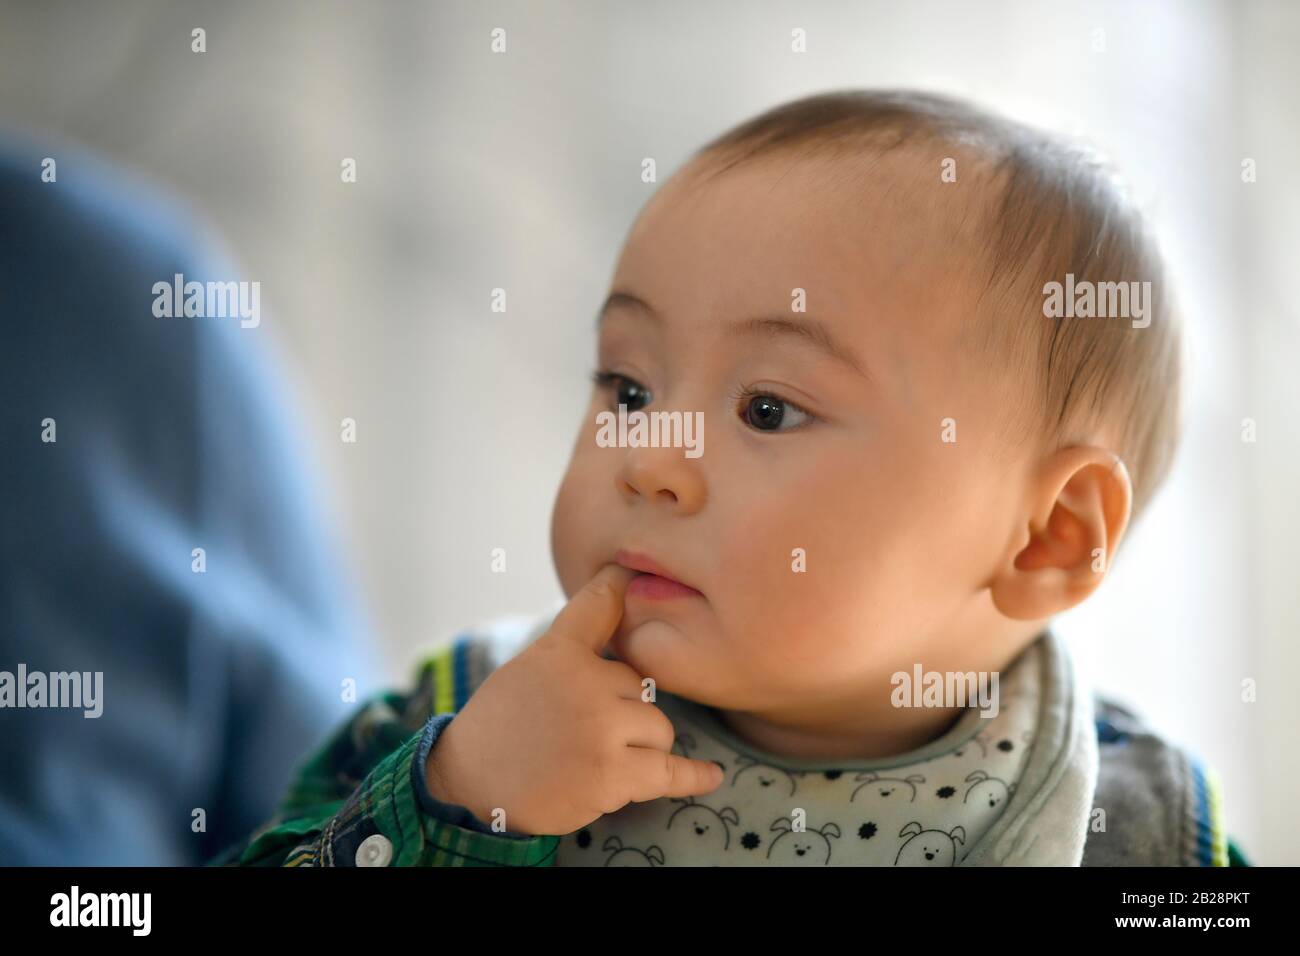 Toddler, 6 months, multiethnic, portrait, thoughtful, Baden-Wuerttemberg, Germany Stock Photo